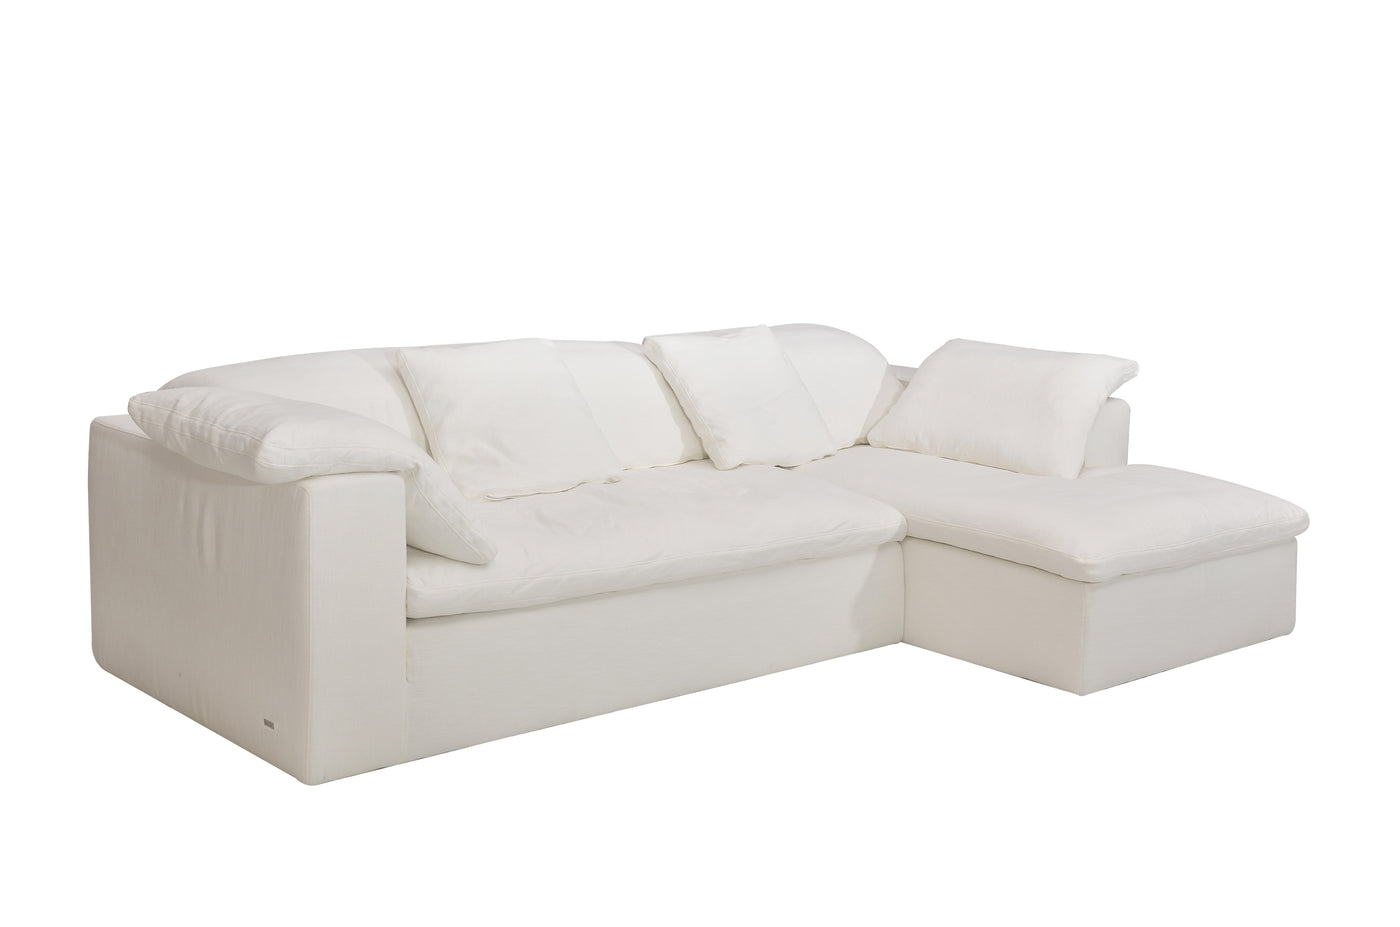 Gemma Sectional - Right facing